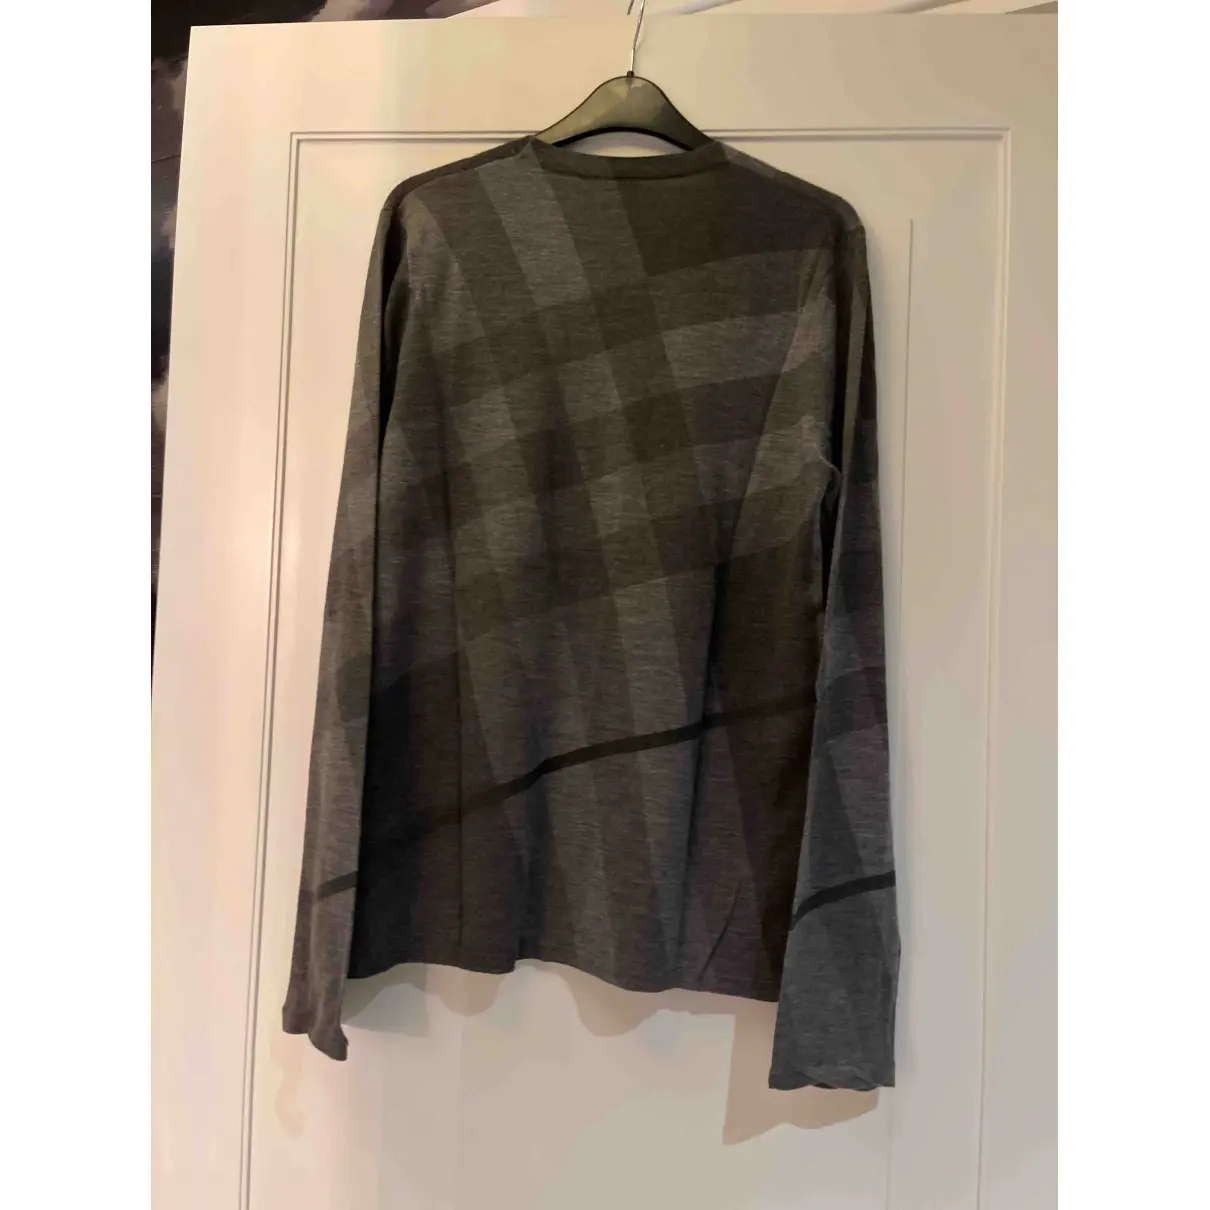 Buy Burberry Cashmere pull online